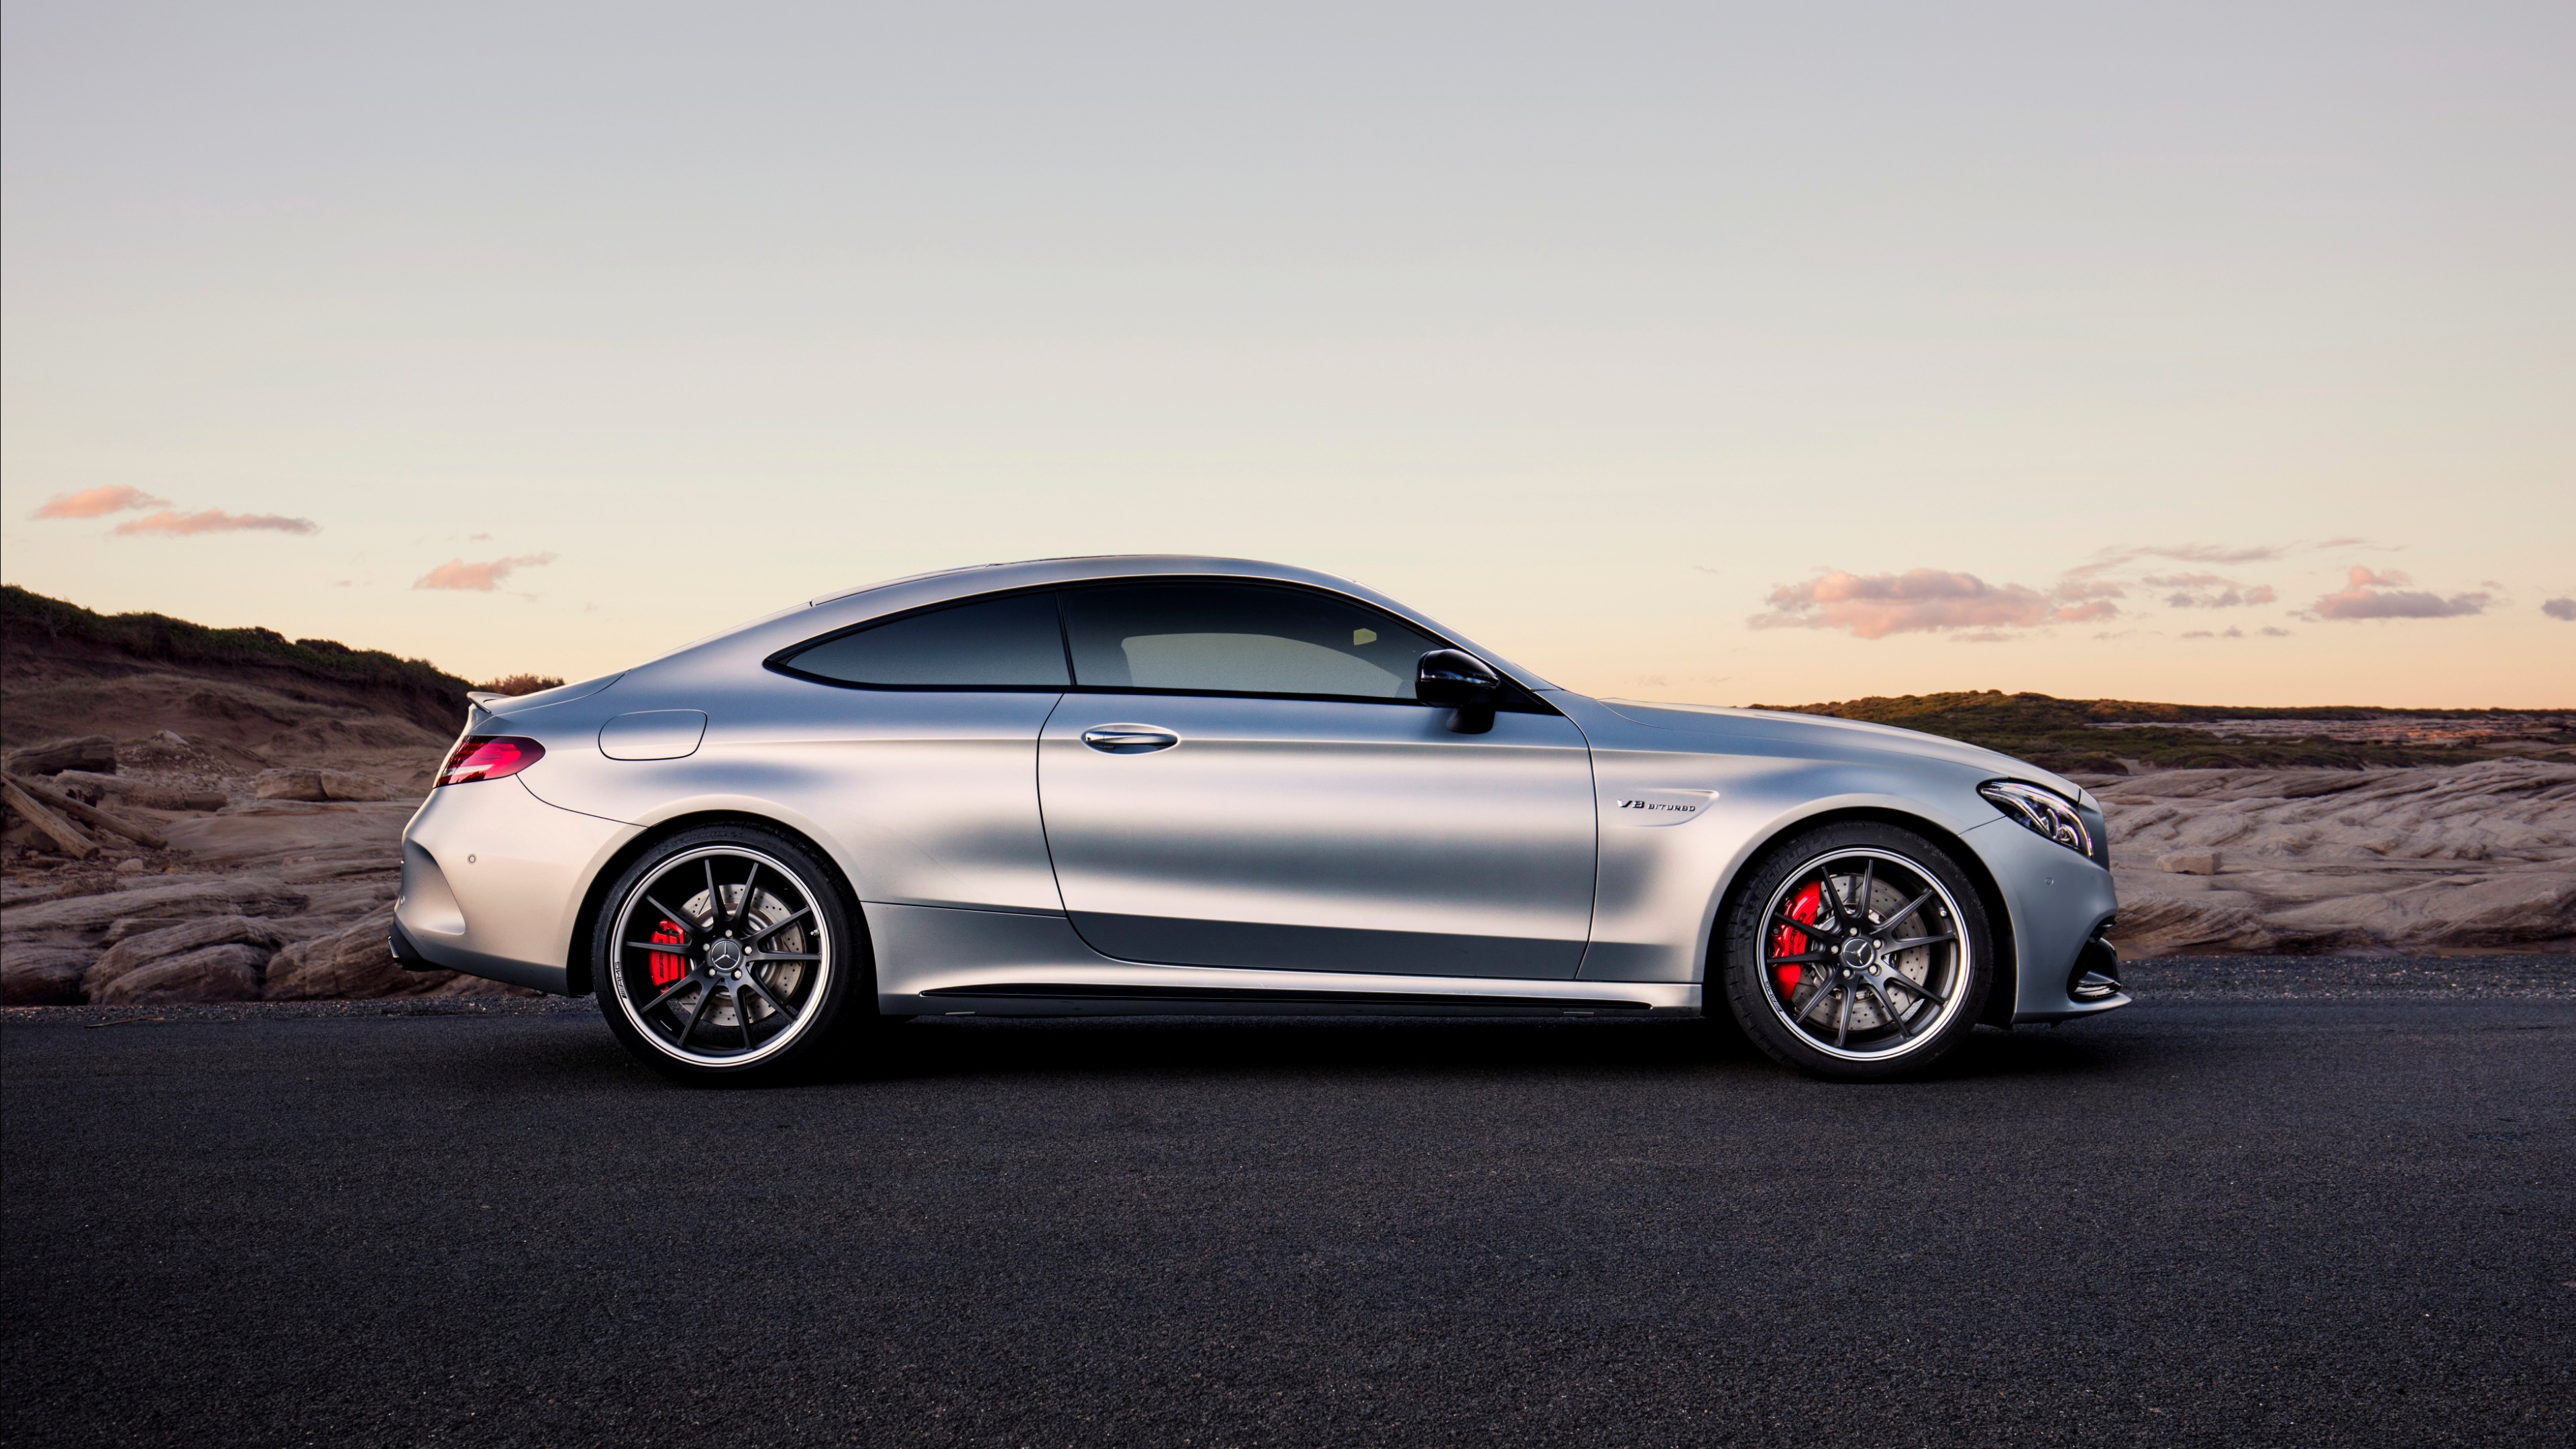 Mercedes AMG C63 S Coupe 2017 Wallpapers   3840x2160   1930576